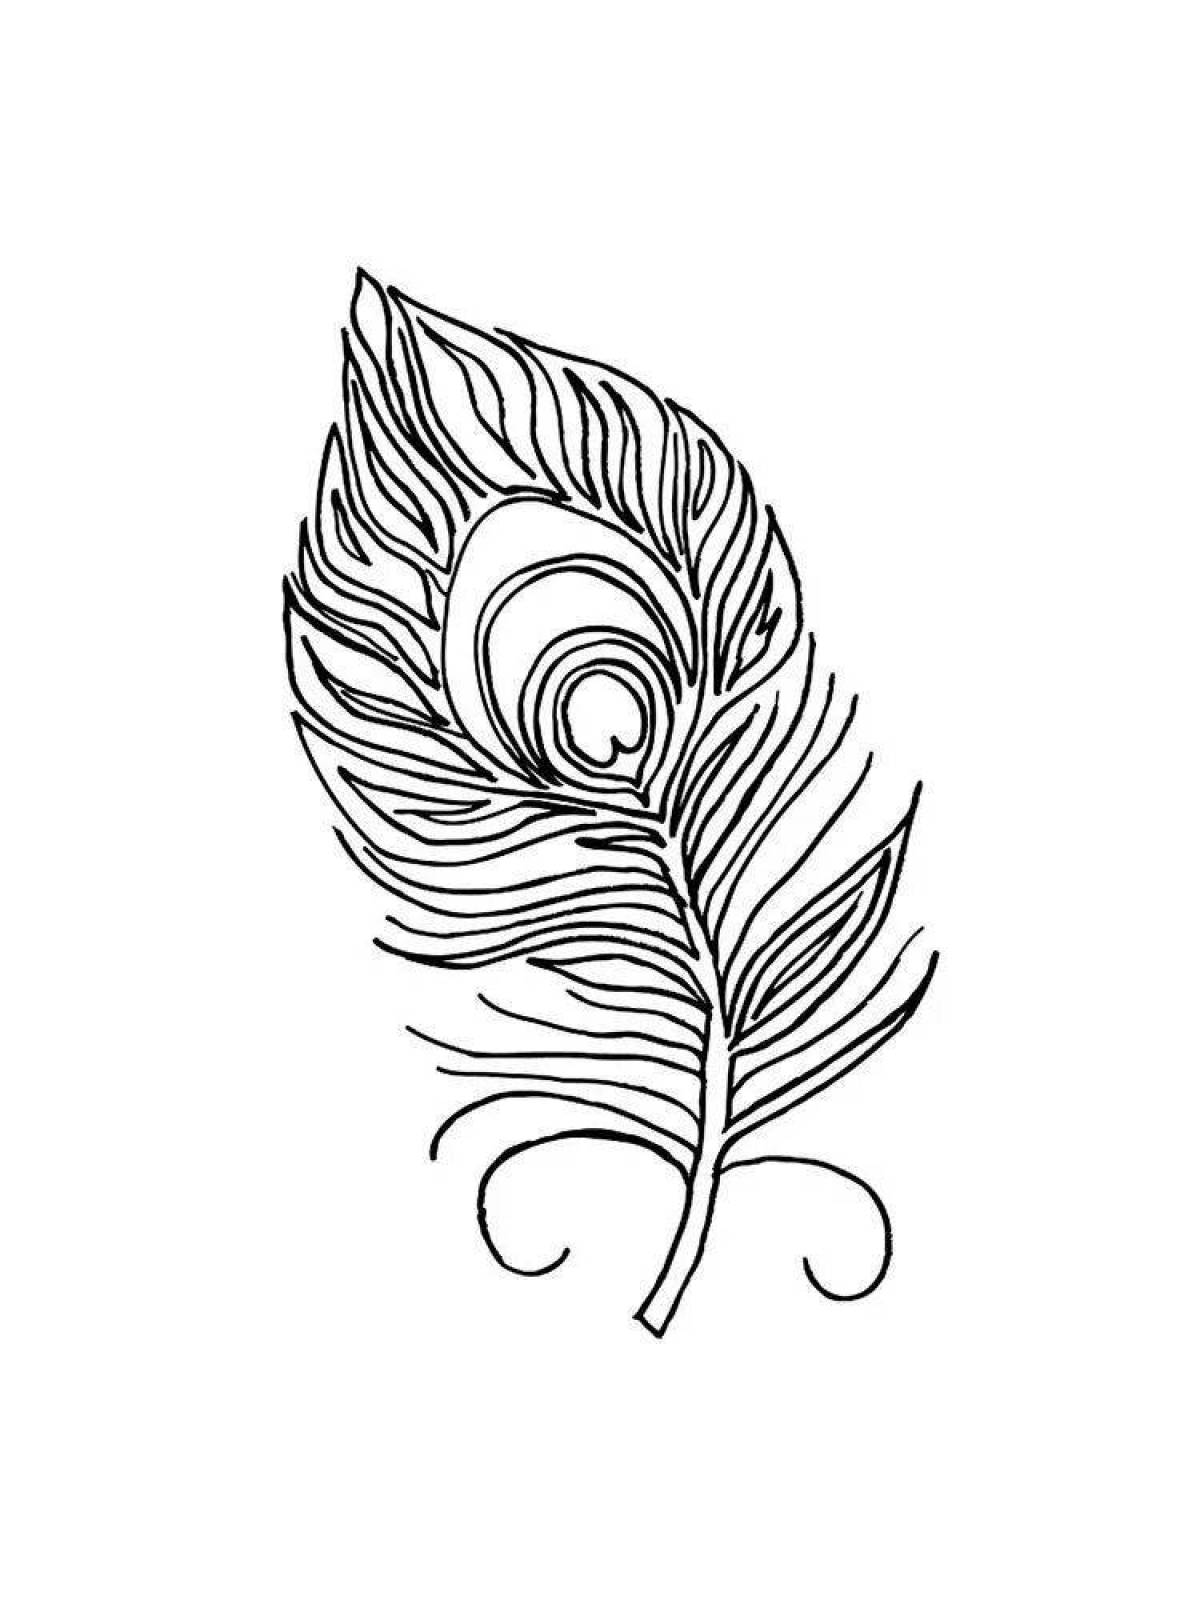 Exquisite feather coloring book